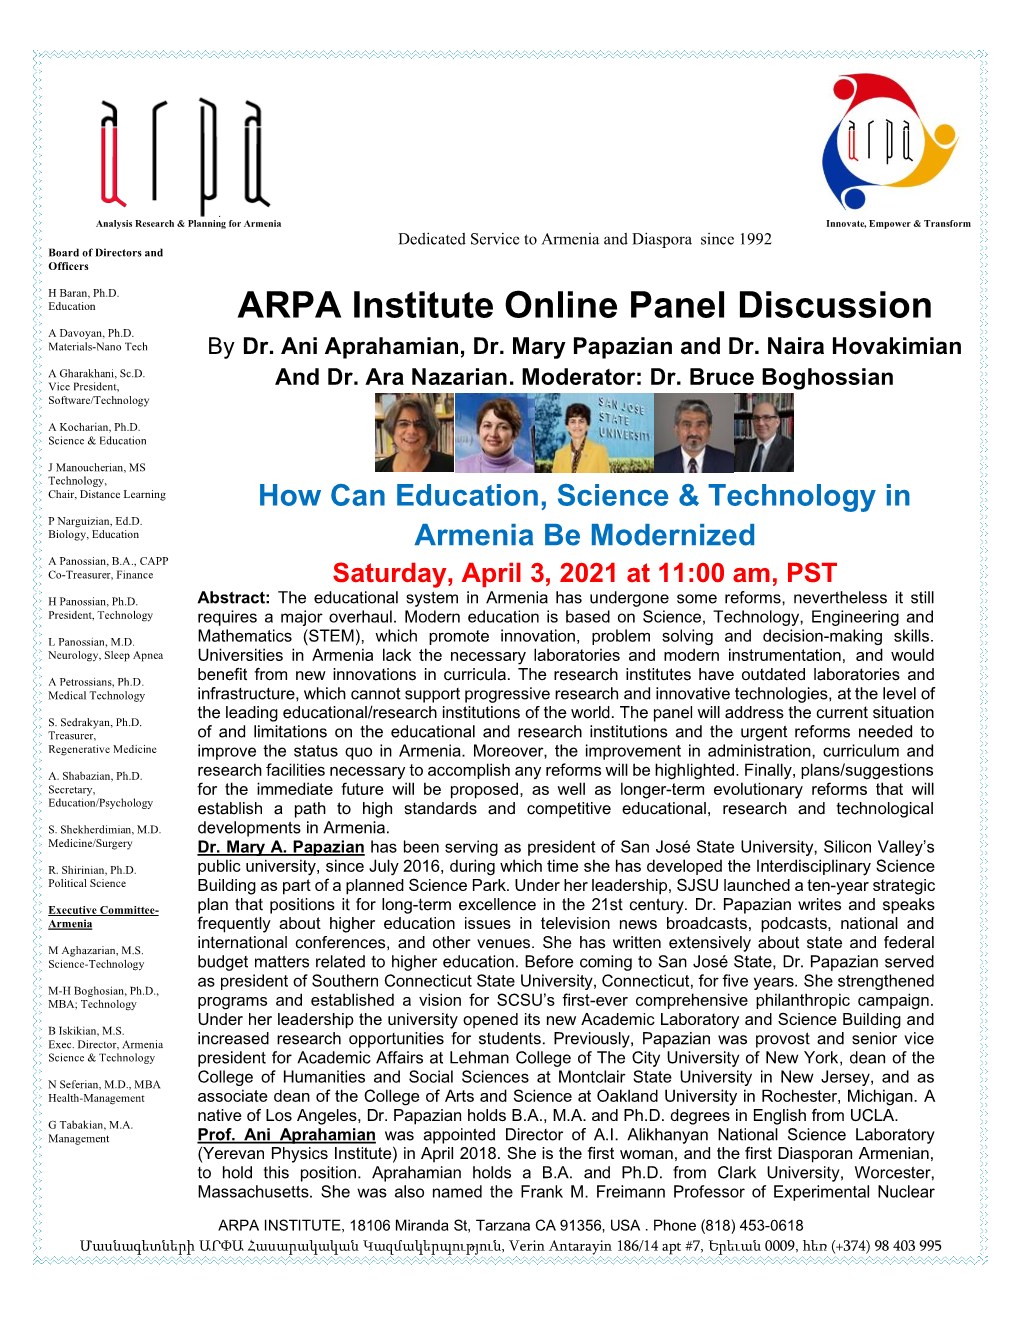 ARPA Institute Online Panel Discussion a Davoyan, Ph.D